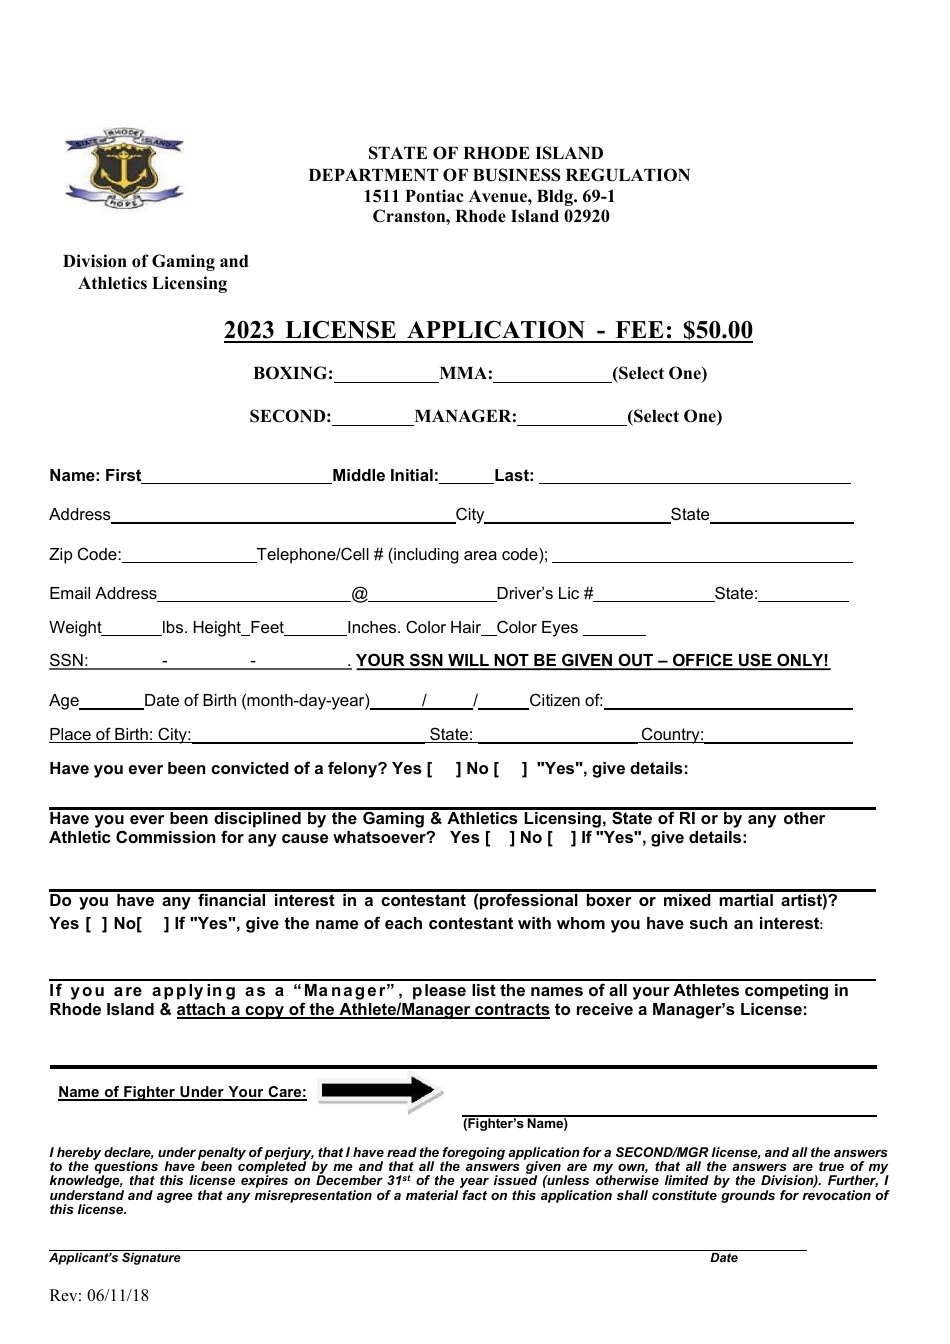 Manager / Second License Application - Rhode Island, Page 1